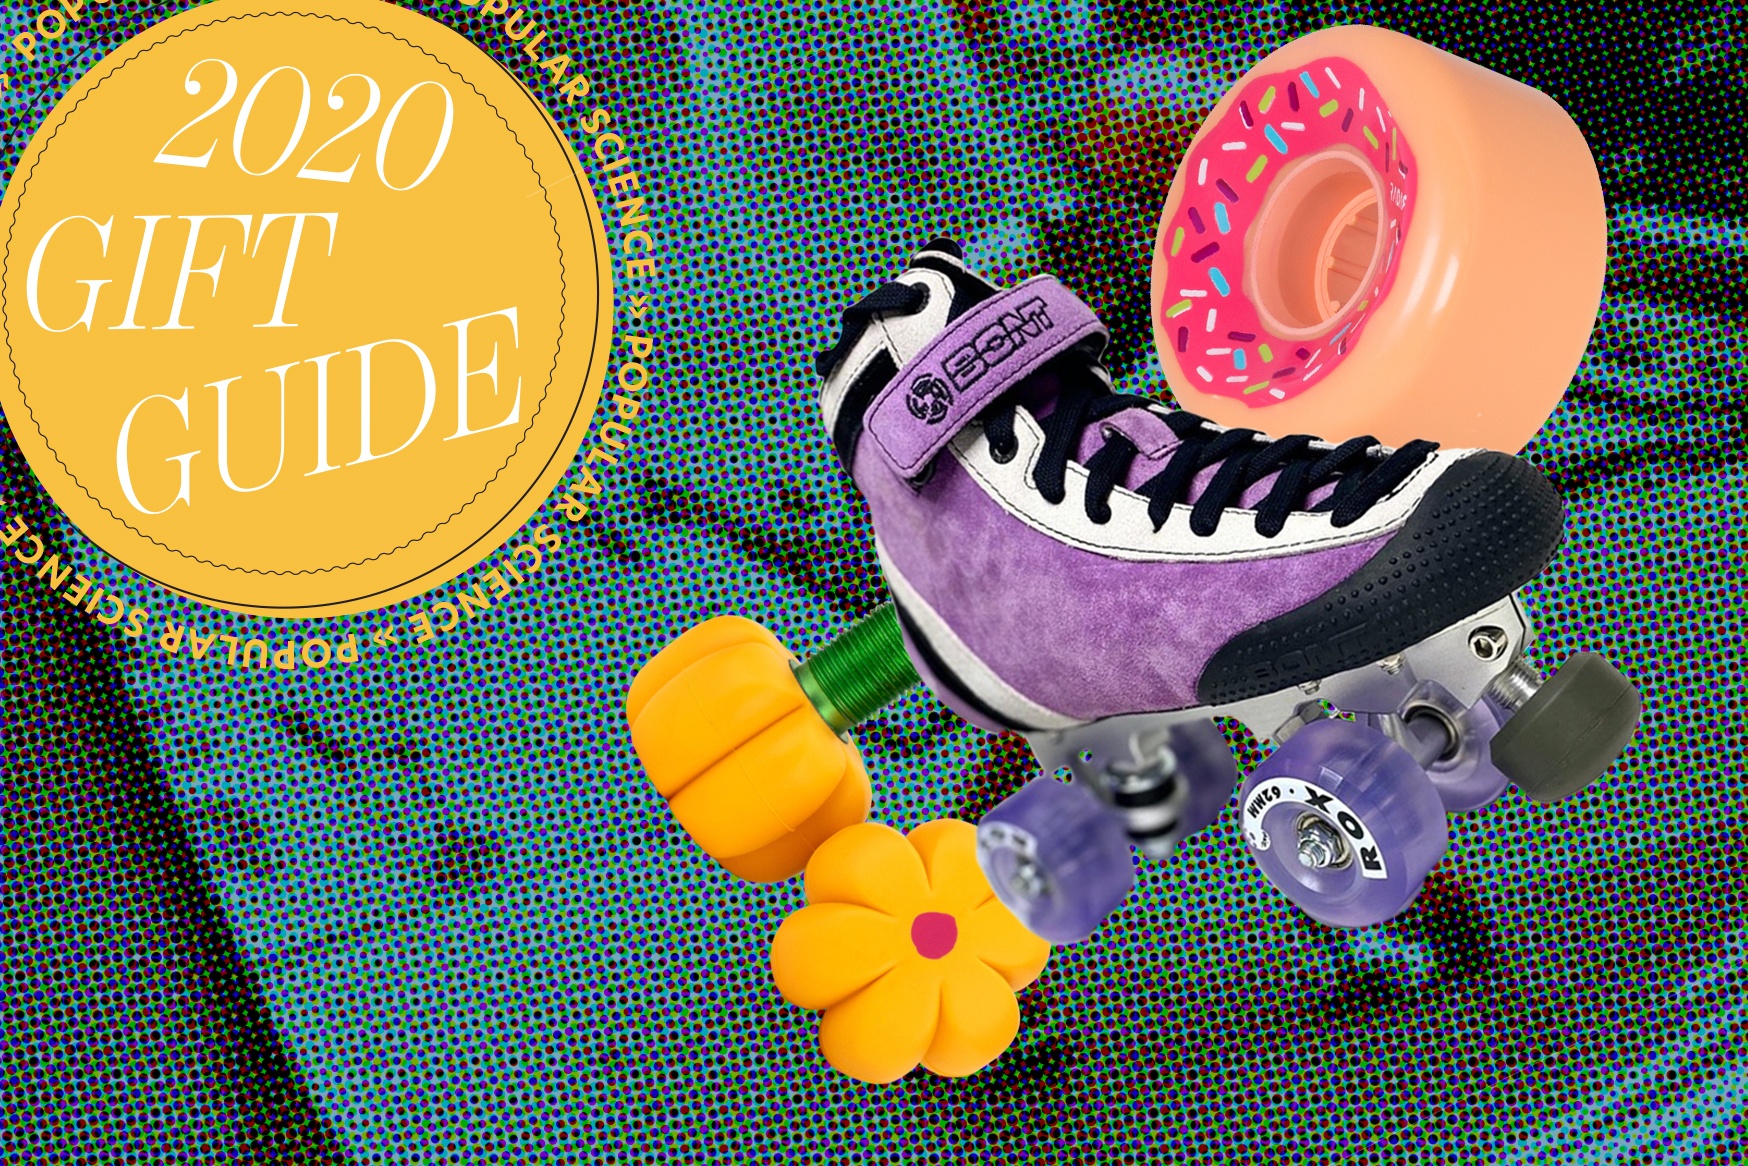 A skate, flower-shaped toe stops, and a wheel painted like a donut sit next to a logo that reads "2020 gift guide"